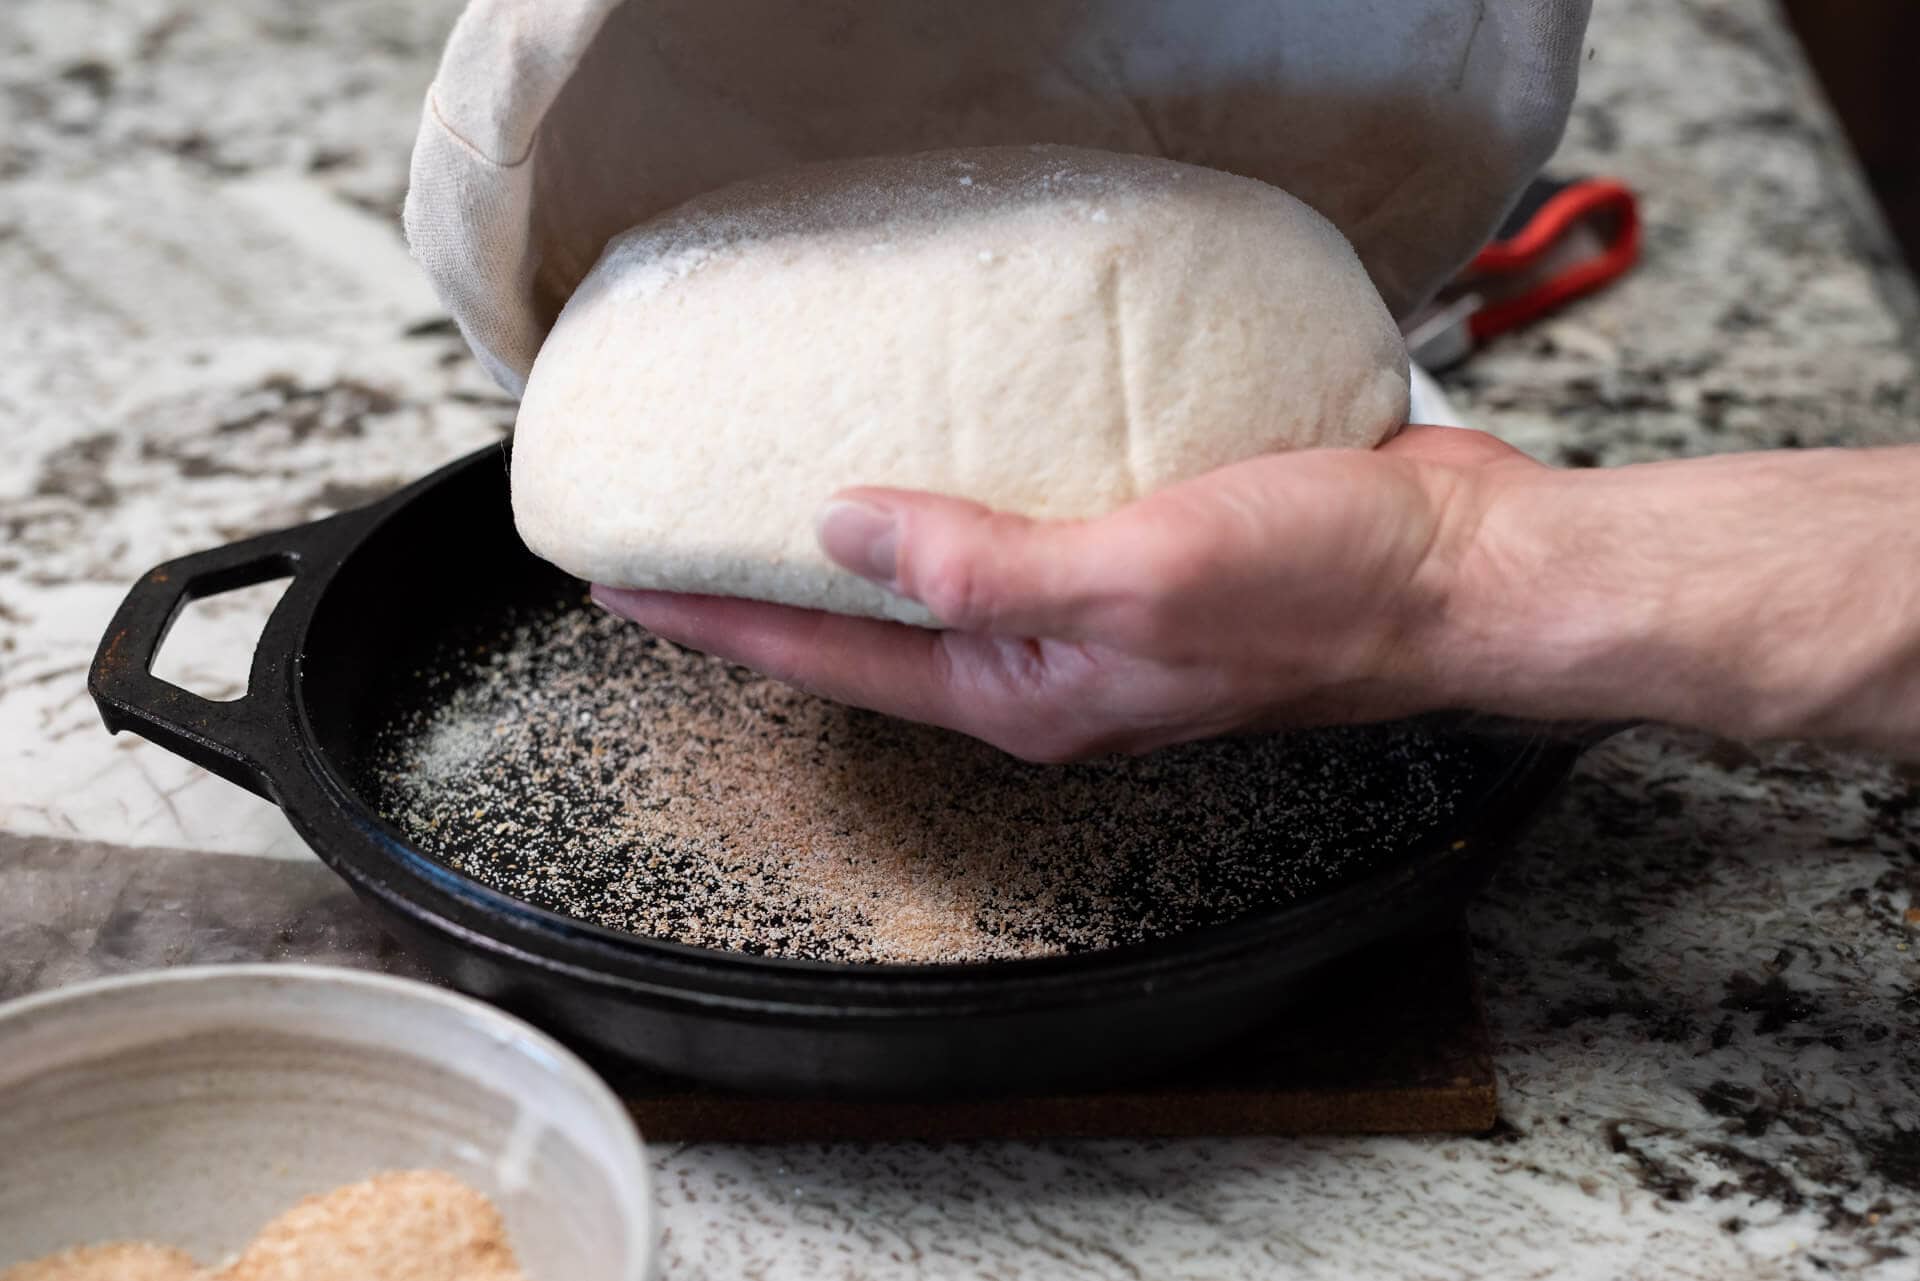 Dutch Oven Bread {Proofing Dough In The Instant Pot} - Aromatic